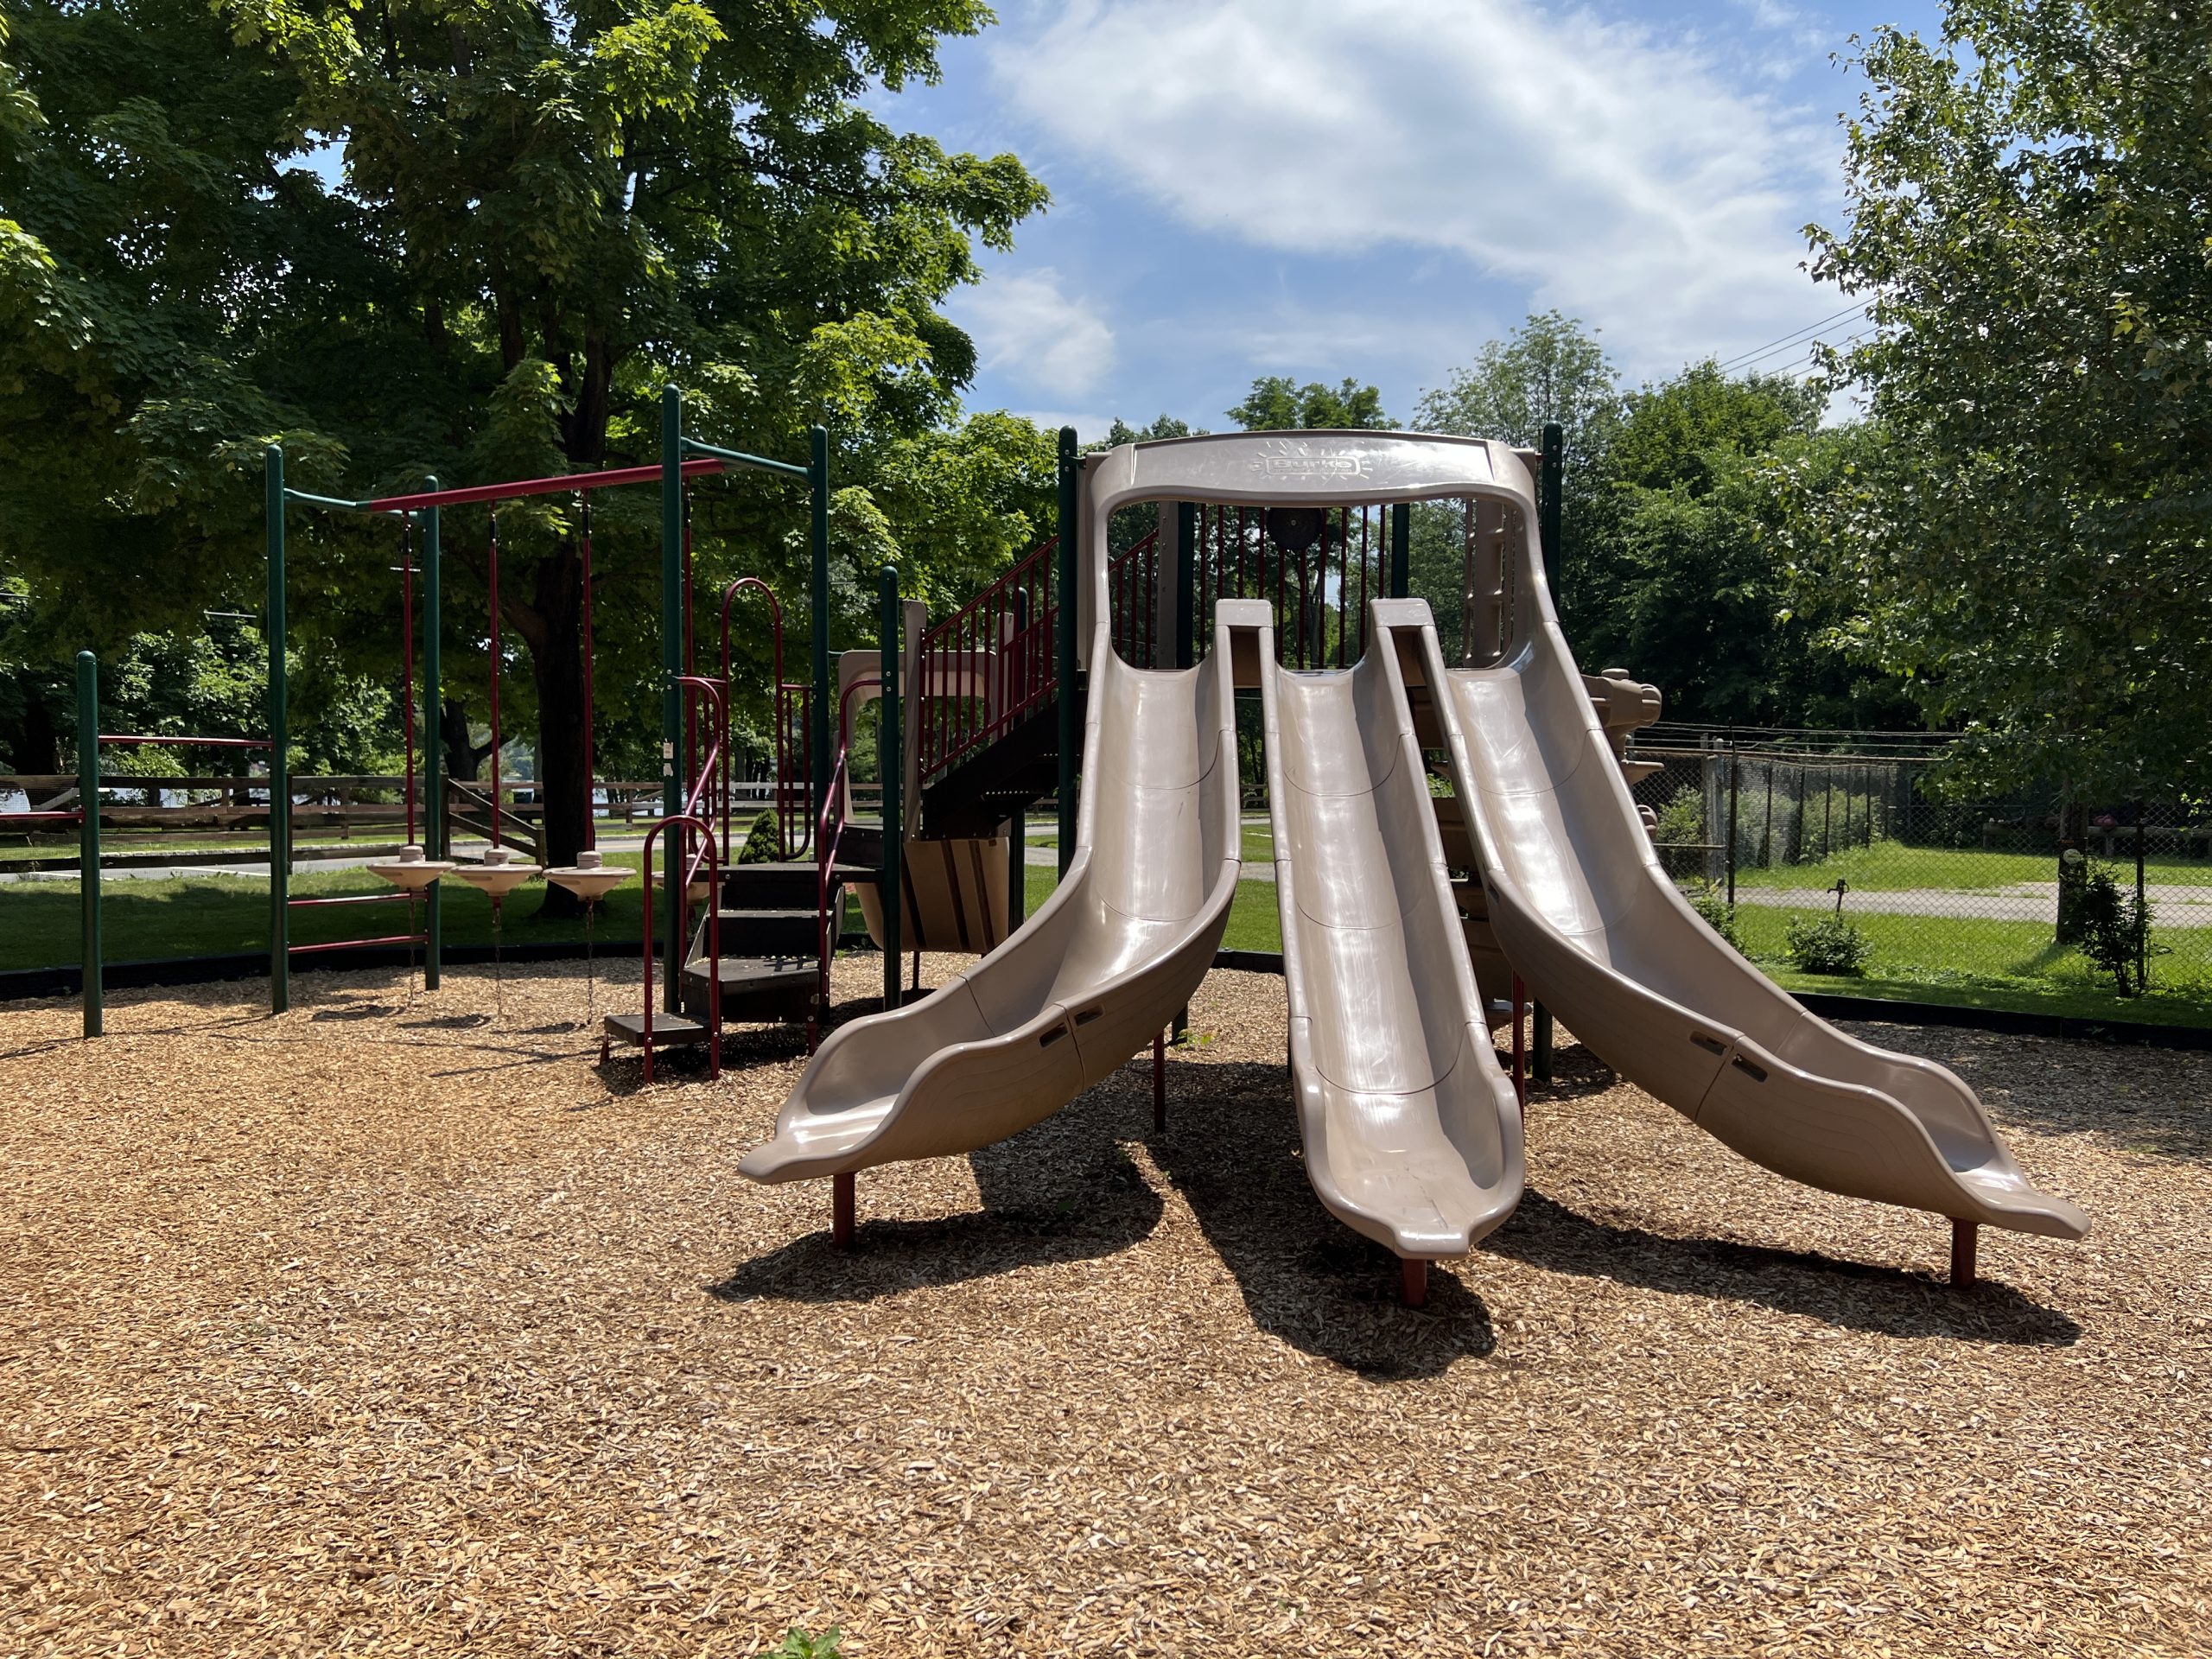 Lake Musconetcong Park Playground in Stanhope NJ - SLIDES - 3 side by side slides with climbing feature front WIDE image